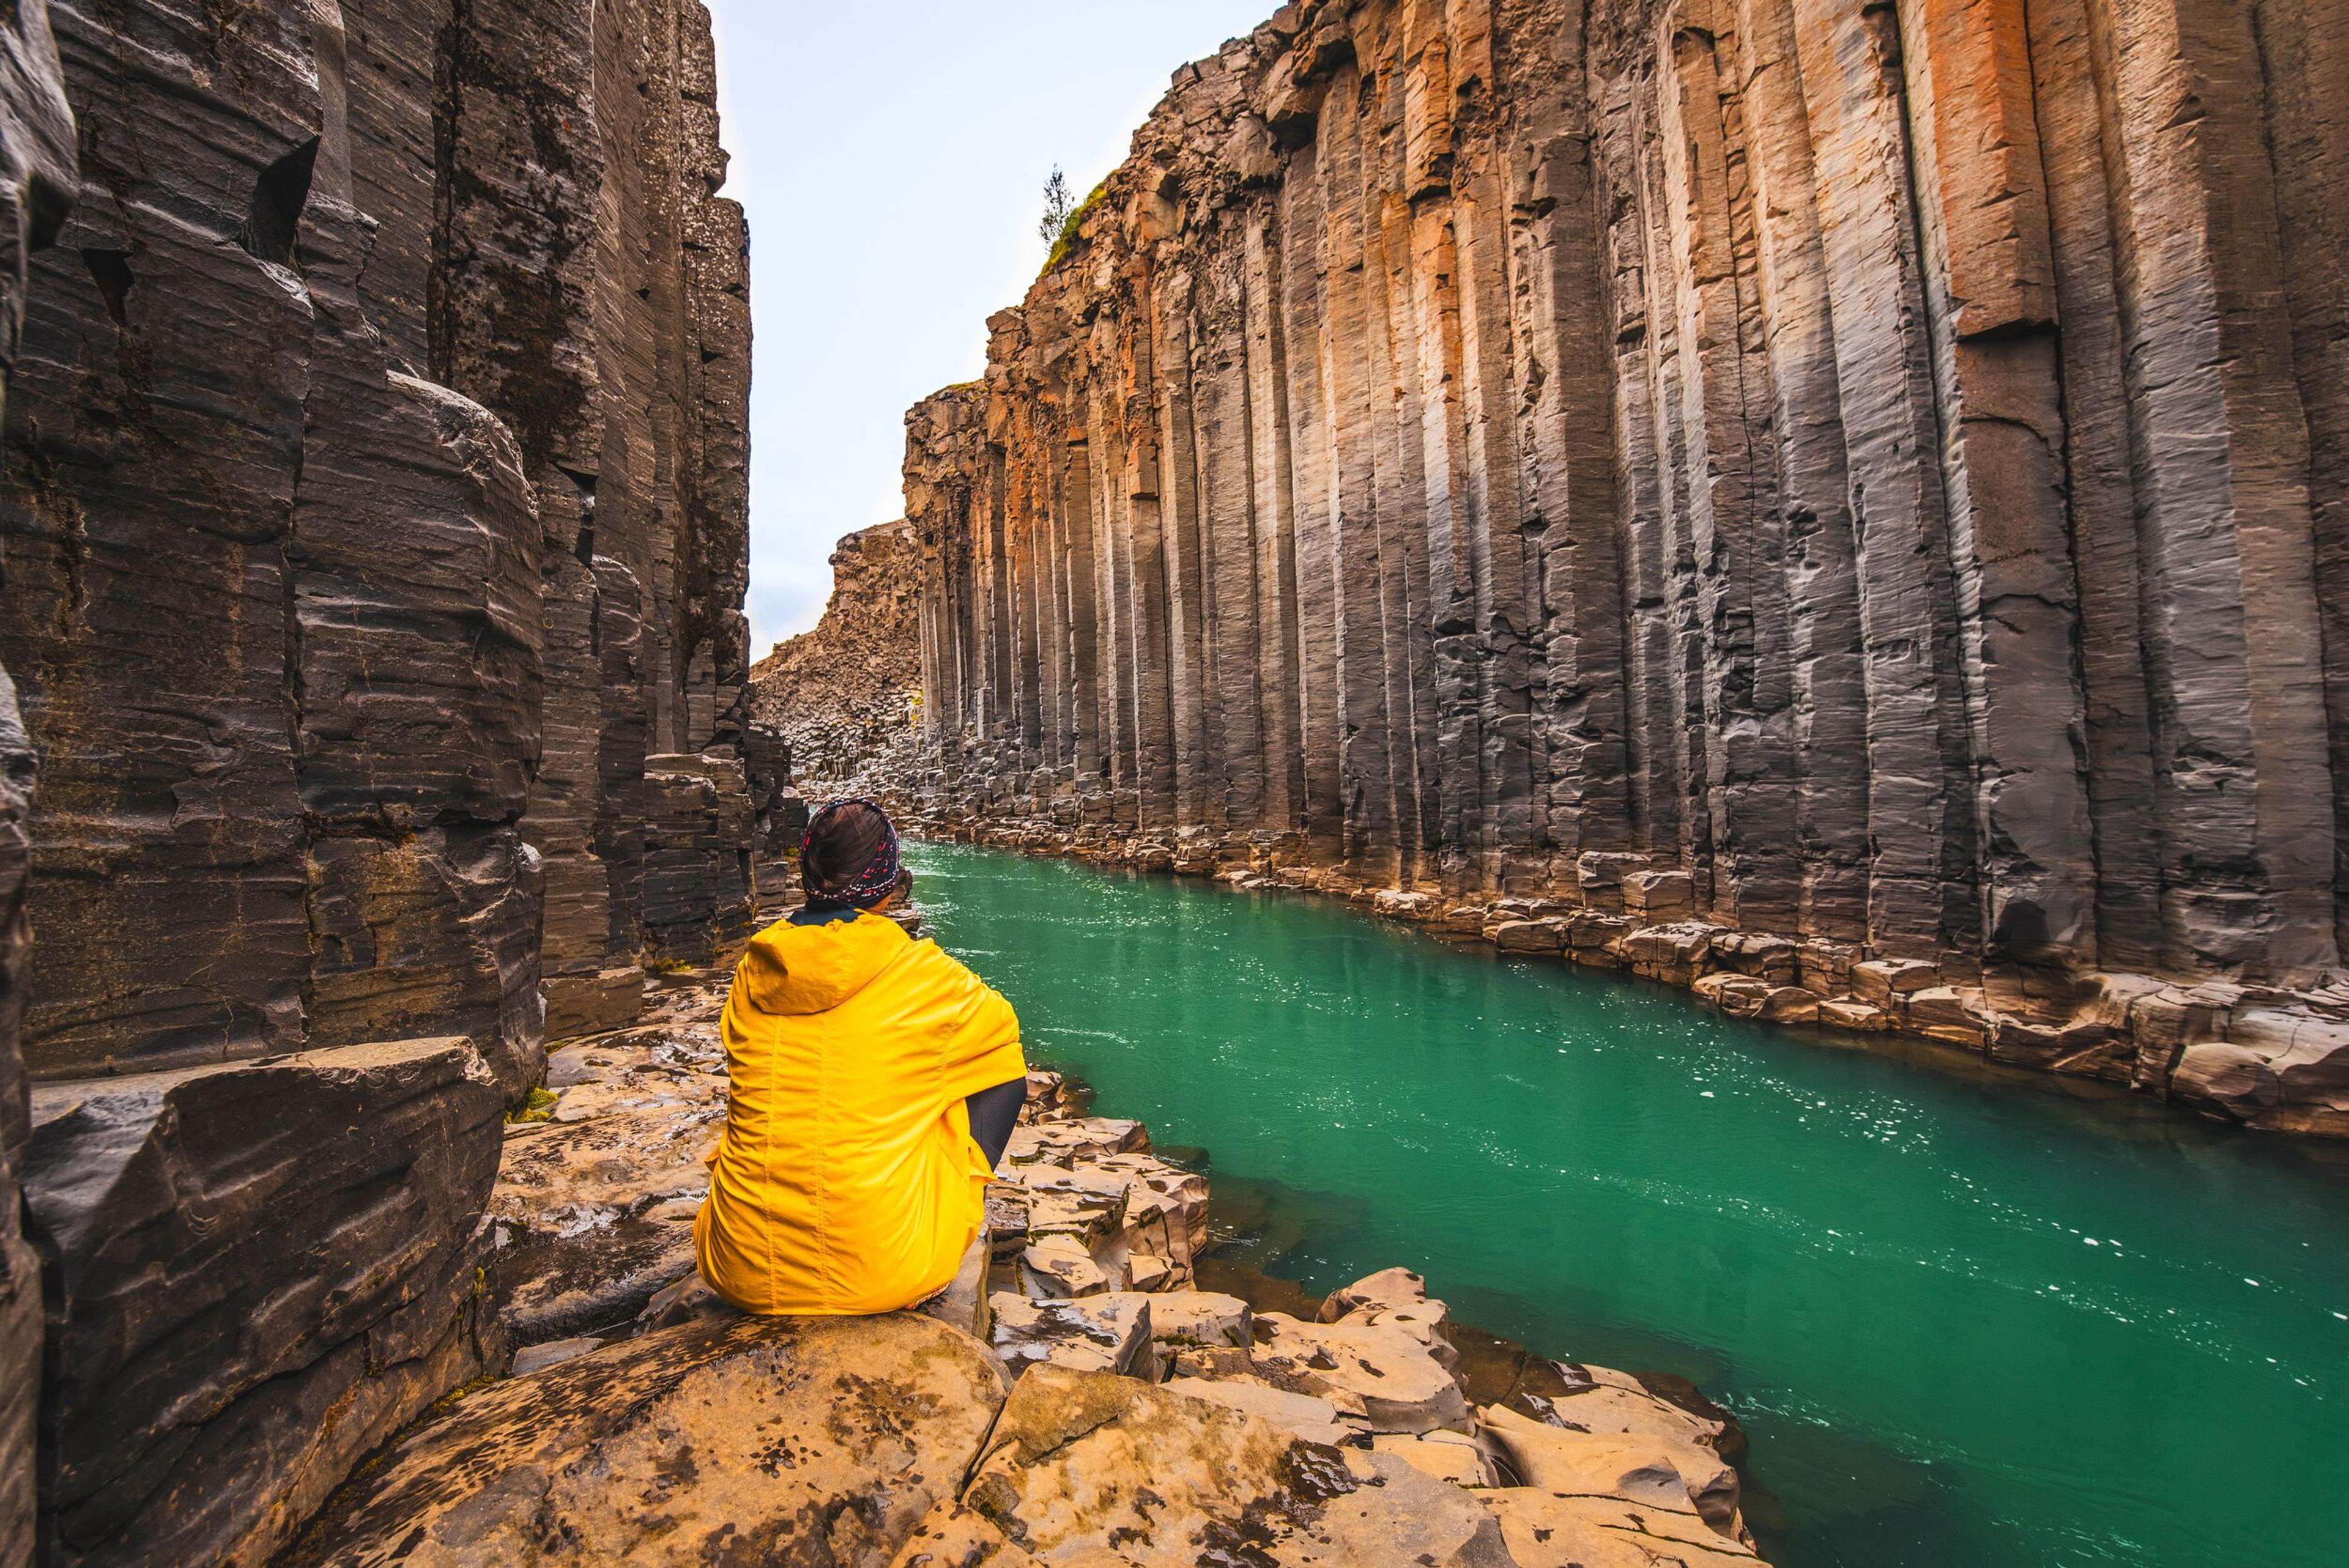 Person in a yellow jacket sitting on a rock ledge, gazing at the emerald green waters of Stuðlagil Canyon in Iceland, surrounded by distinctive tall basalt columns